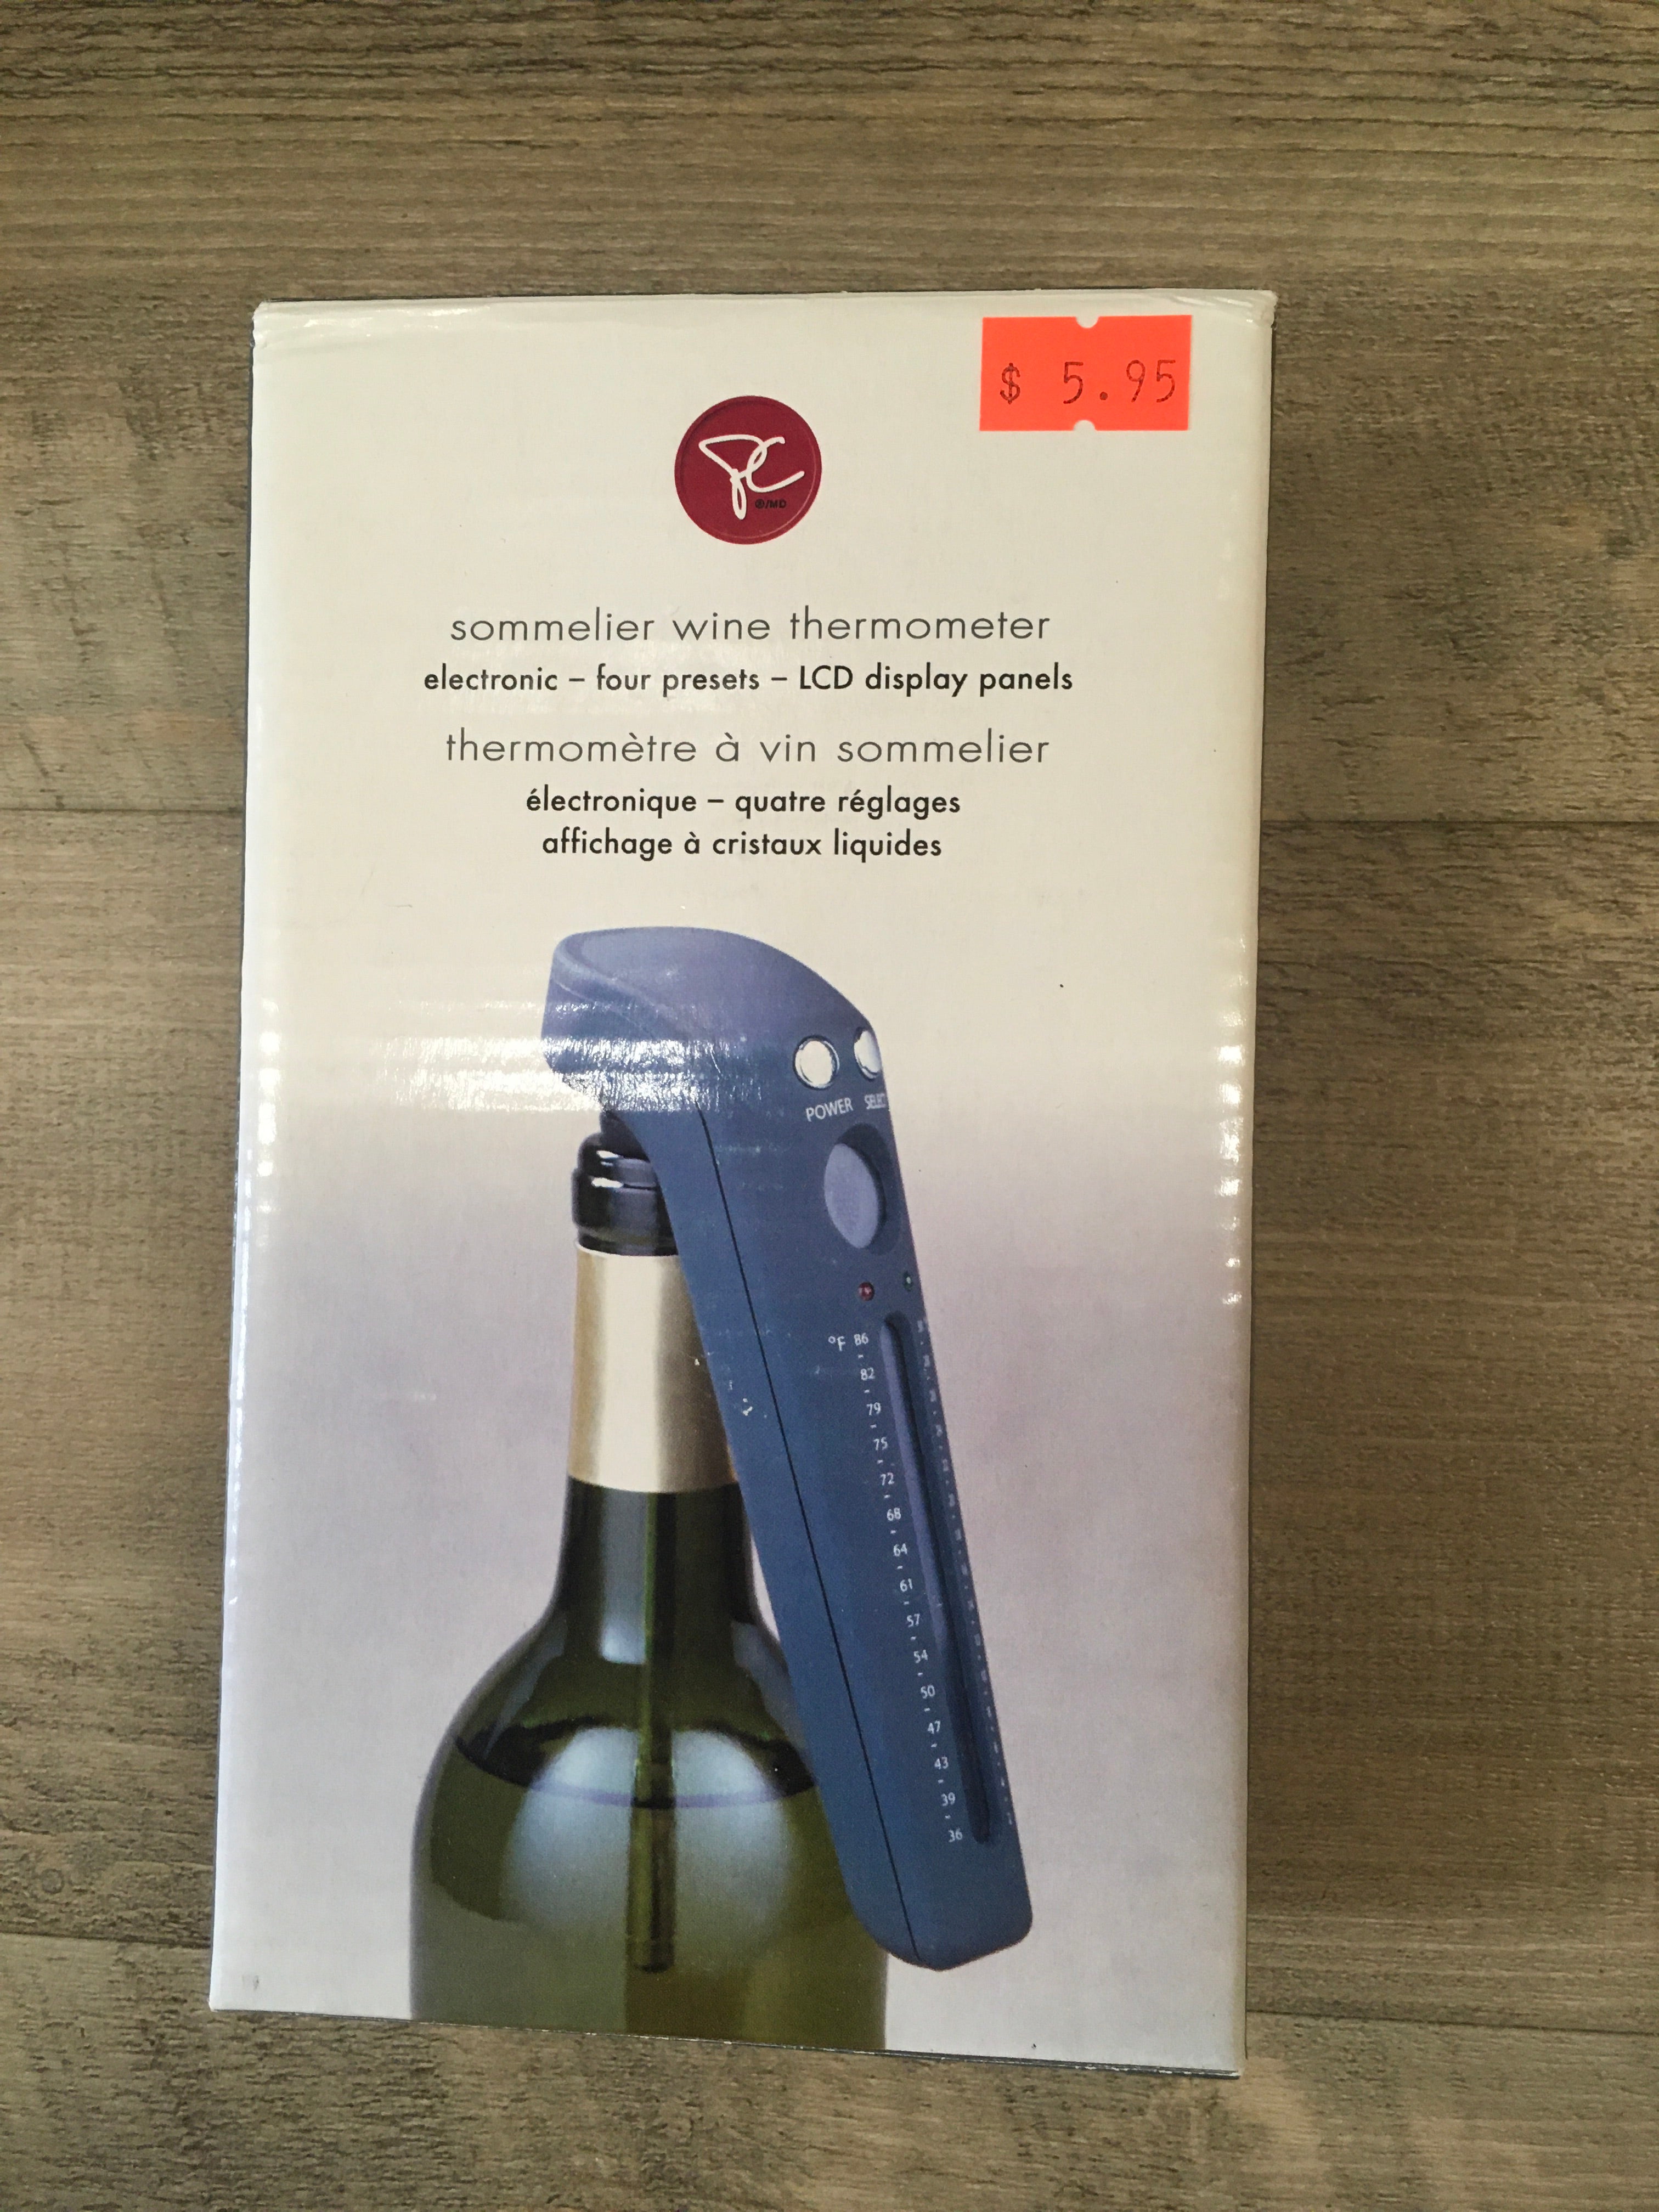 Sommelier Wine thermometer